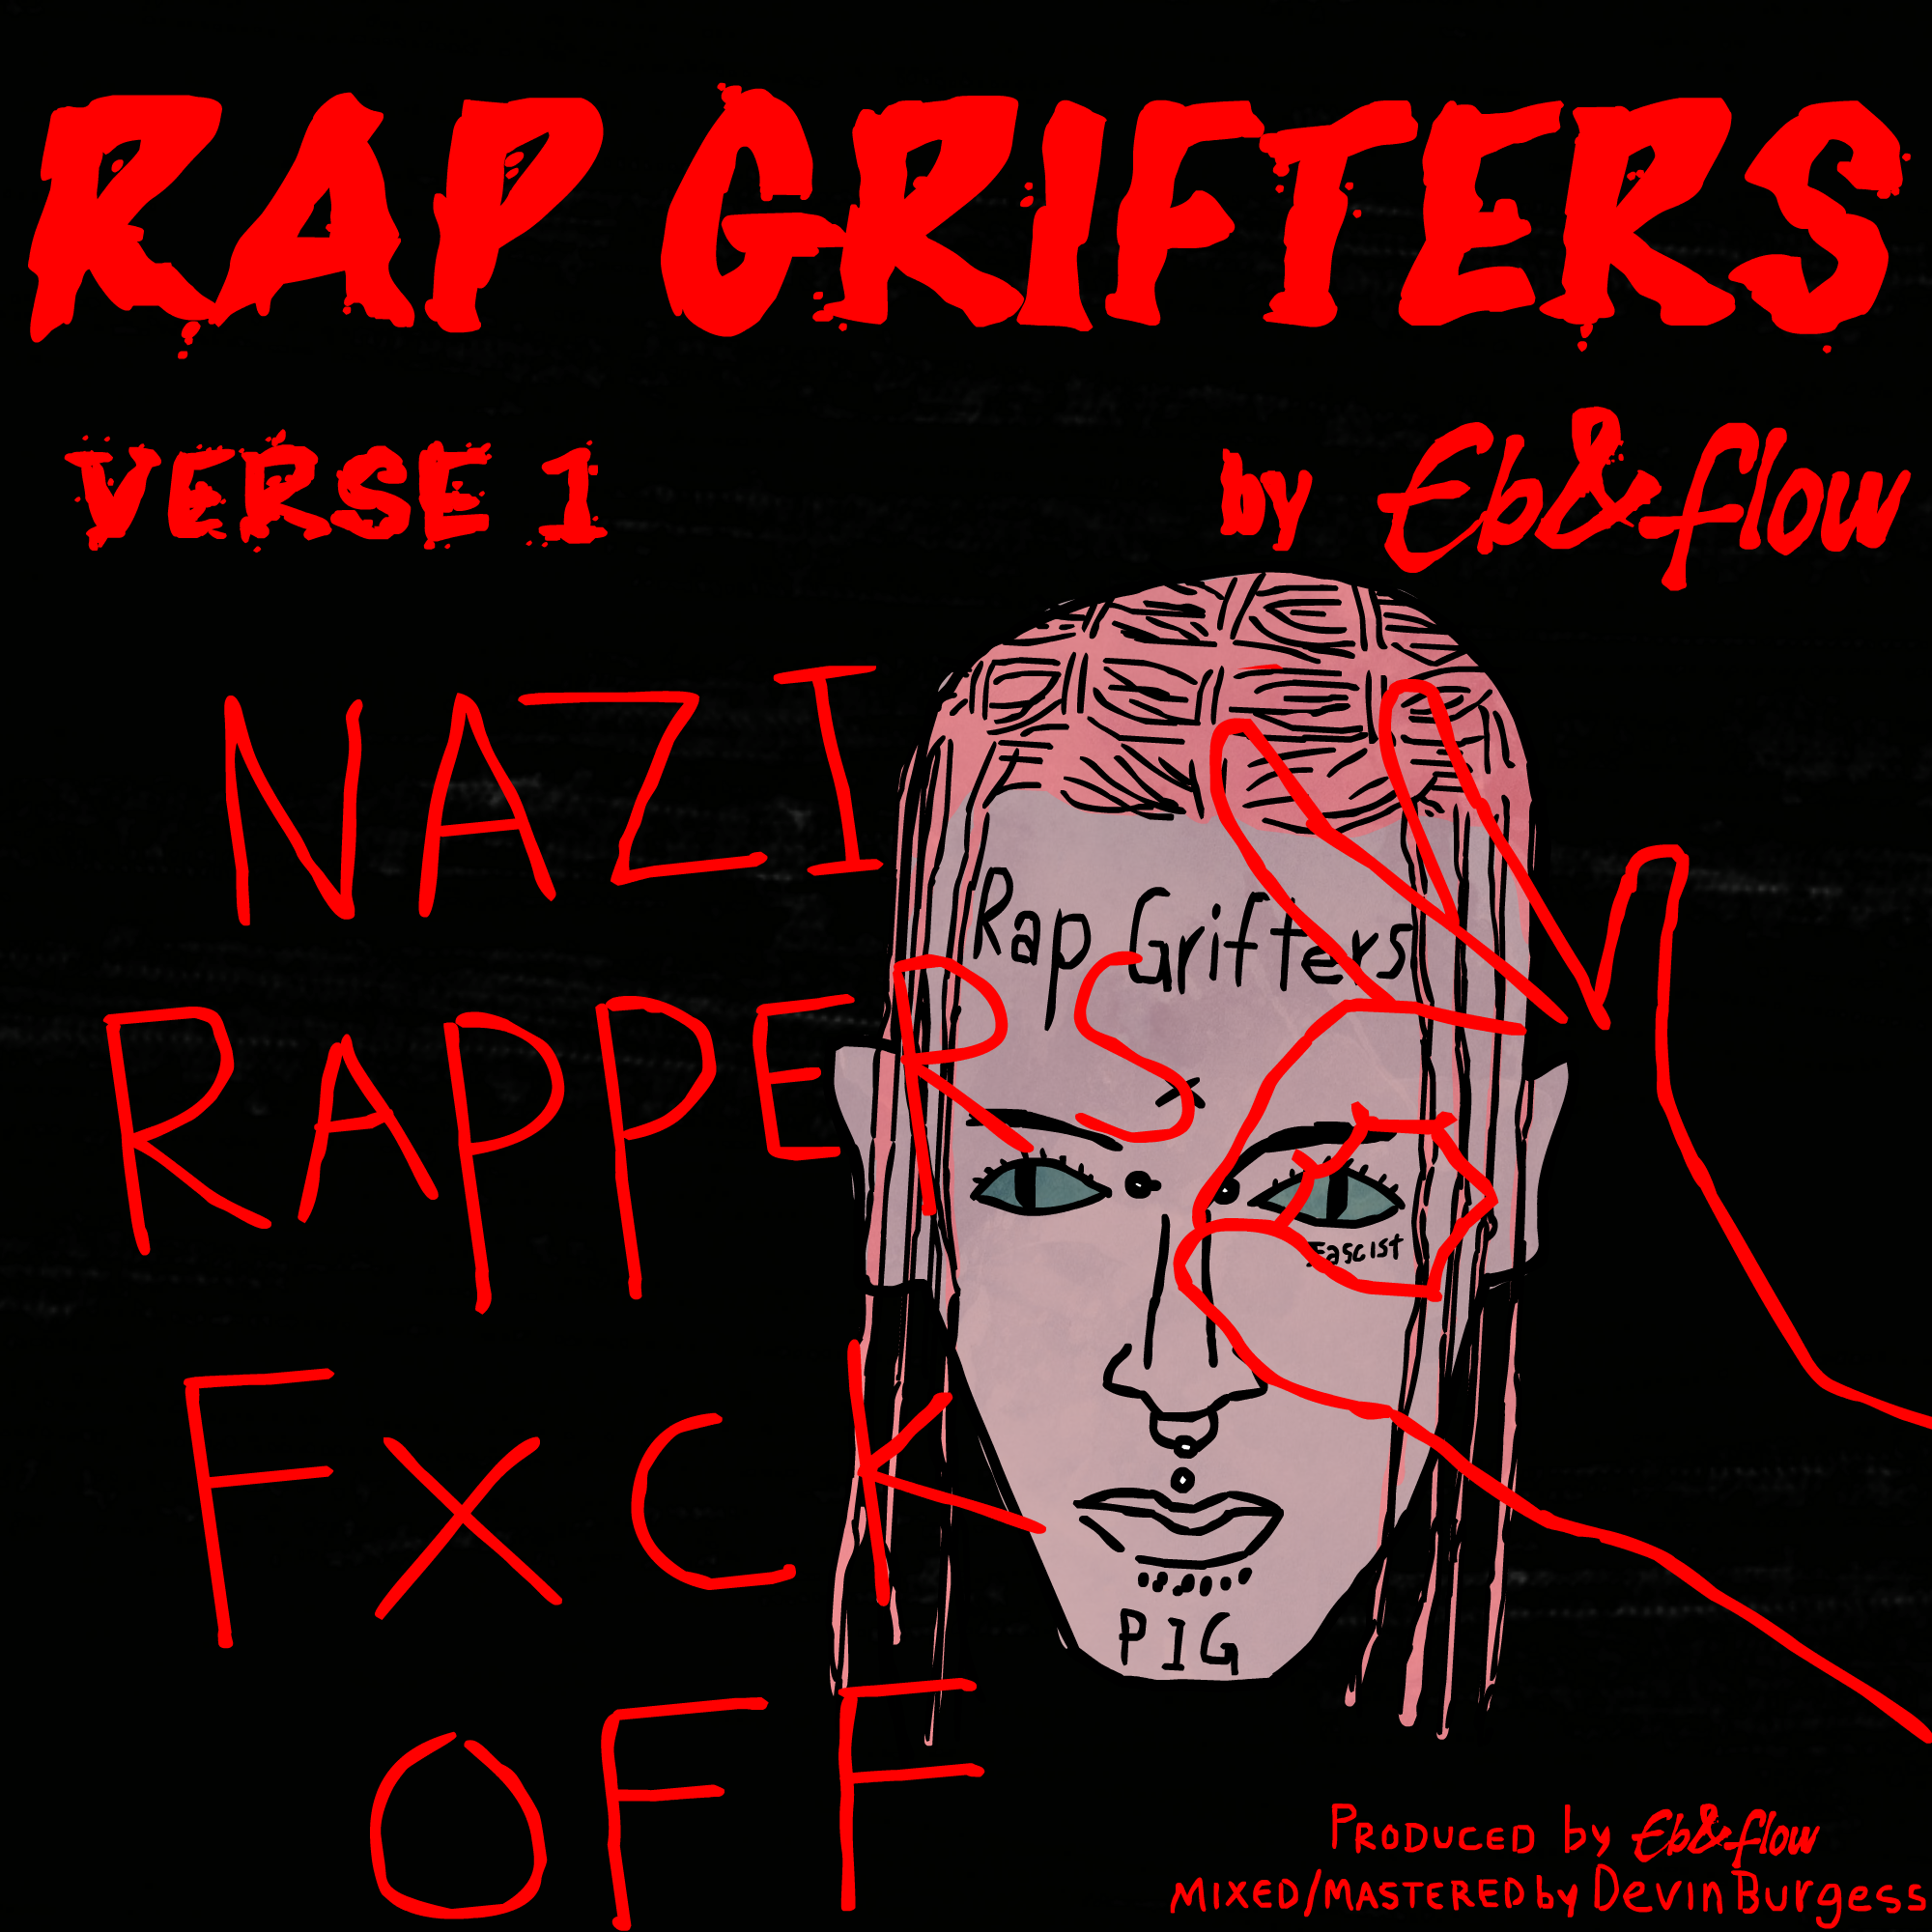 With his roots in groovy, jazzy old school Hip Hop techniques,  ‘Eb&Flow’ soon drops ‘Rap Grifters’ 11/1.